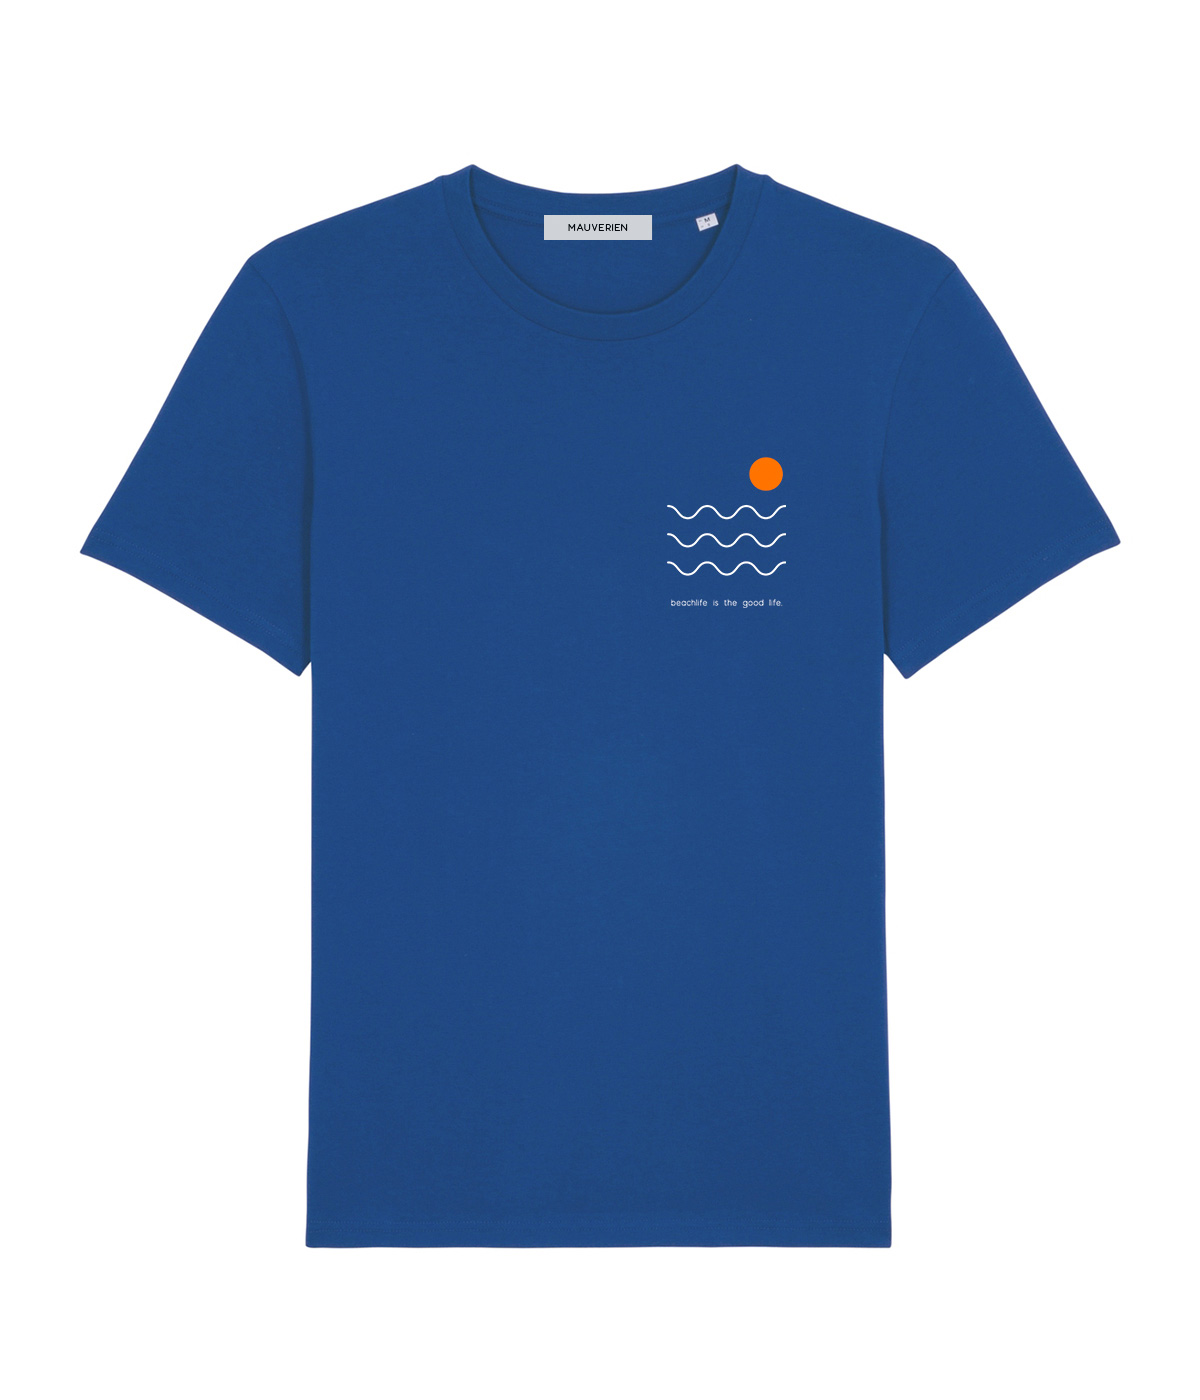 Blue cotton t-shirt with 3 wavy lines, orange circle & the message beachlife is the good life, printed top left.